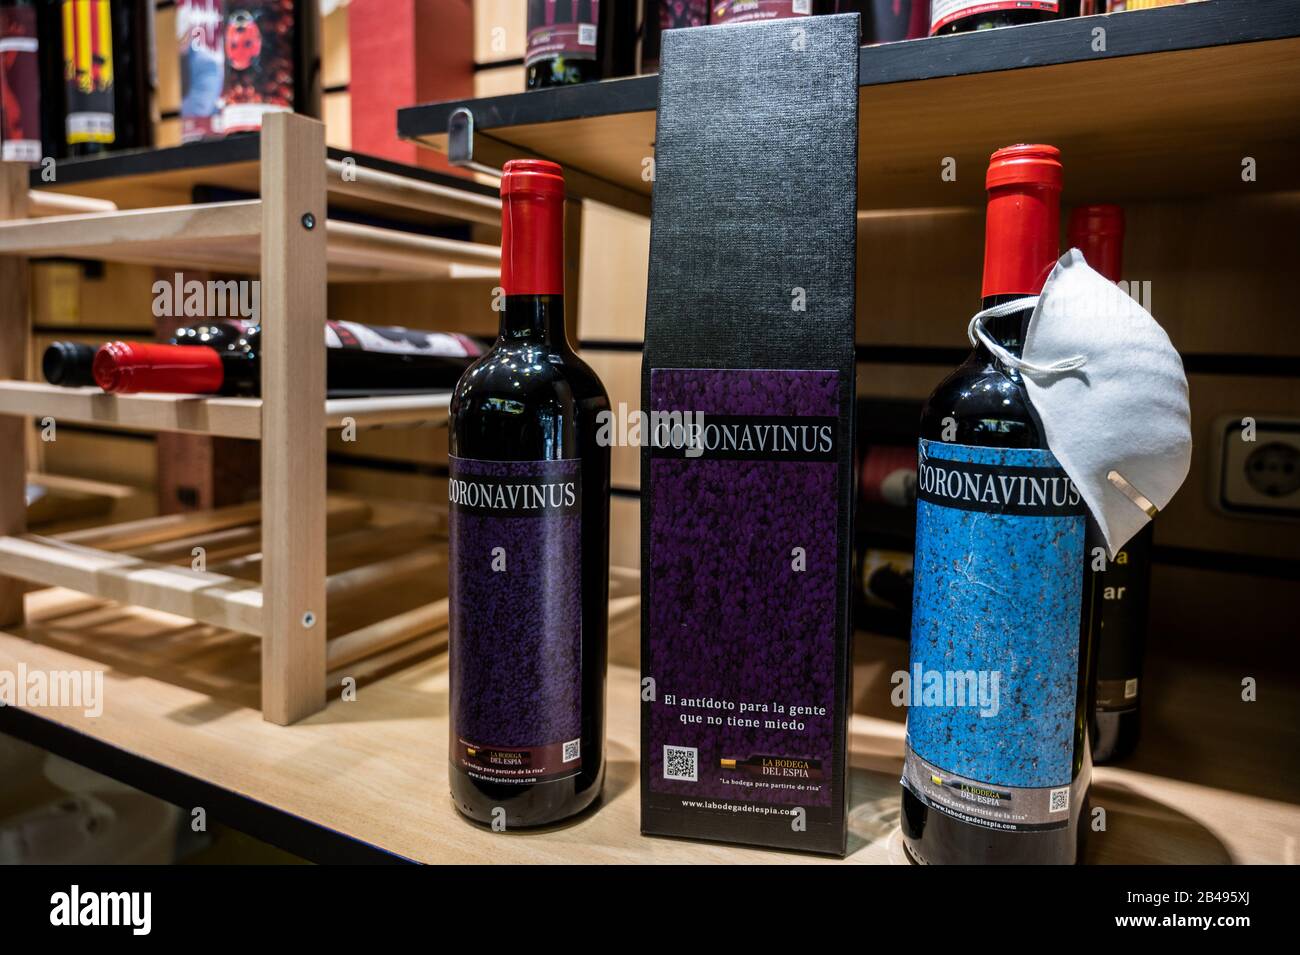 Madrid, Spain. 06th Mar, 2020. Madrid, Spain. March 6, 2020. The shop 'La tienda del Espia' (The spy shop) showing one of their latest products, a Coronavirus wine named 'Coronavinus, the antidote for people who are not afraid'. The promotion includes a health protection mask with each bottle. Spain has reported to date 5 deaths and 345 infected by the coronavirus (covid-19). Credit: Marcos del Mazo/Alamy Live News Stock Photo